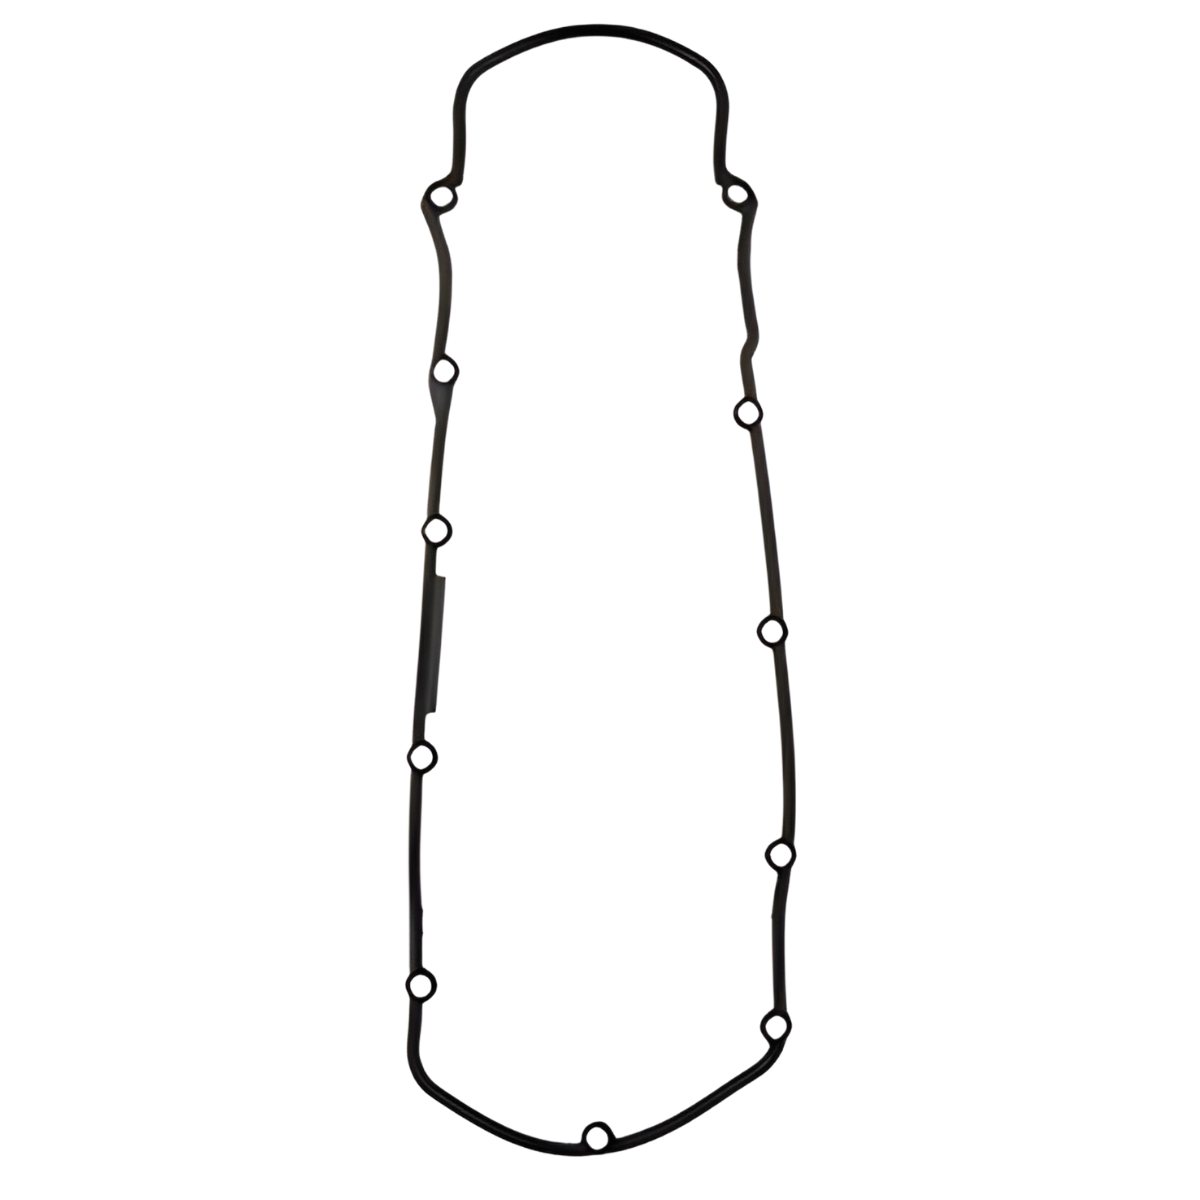 MAHLE Engine Valve Cover Gasket VS50449S